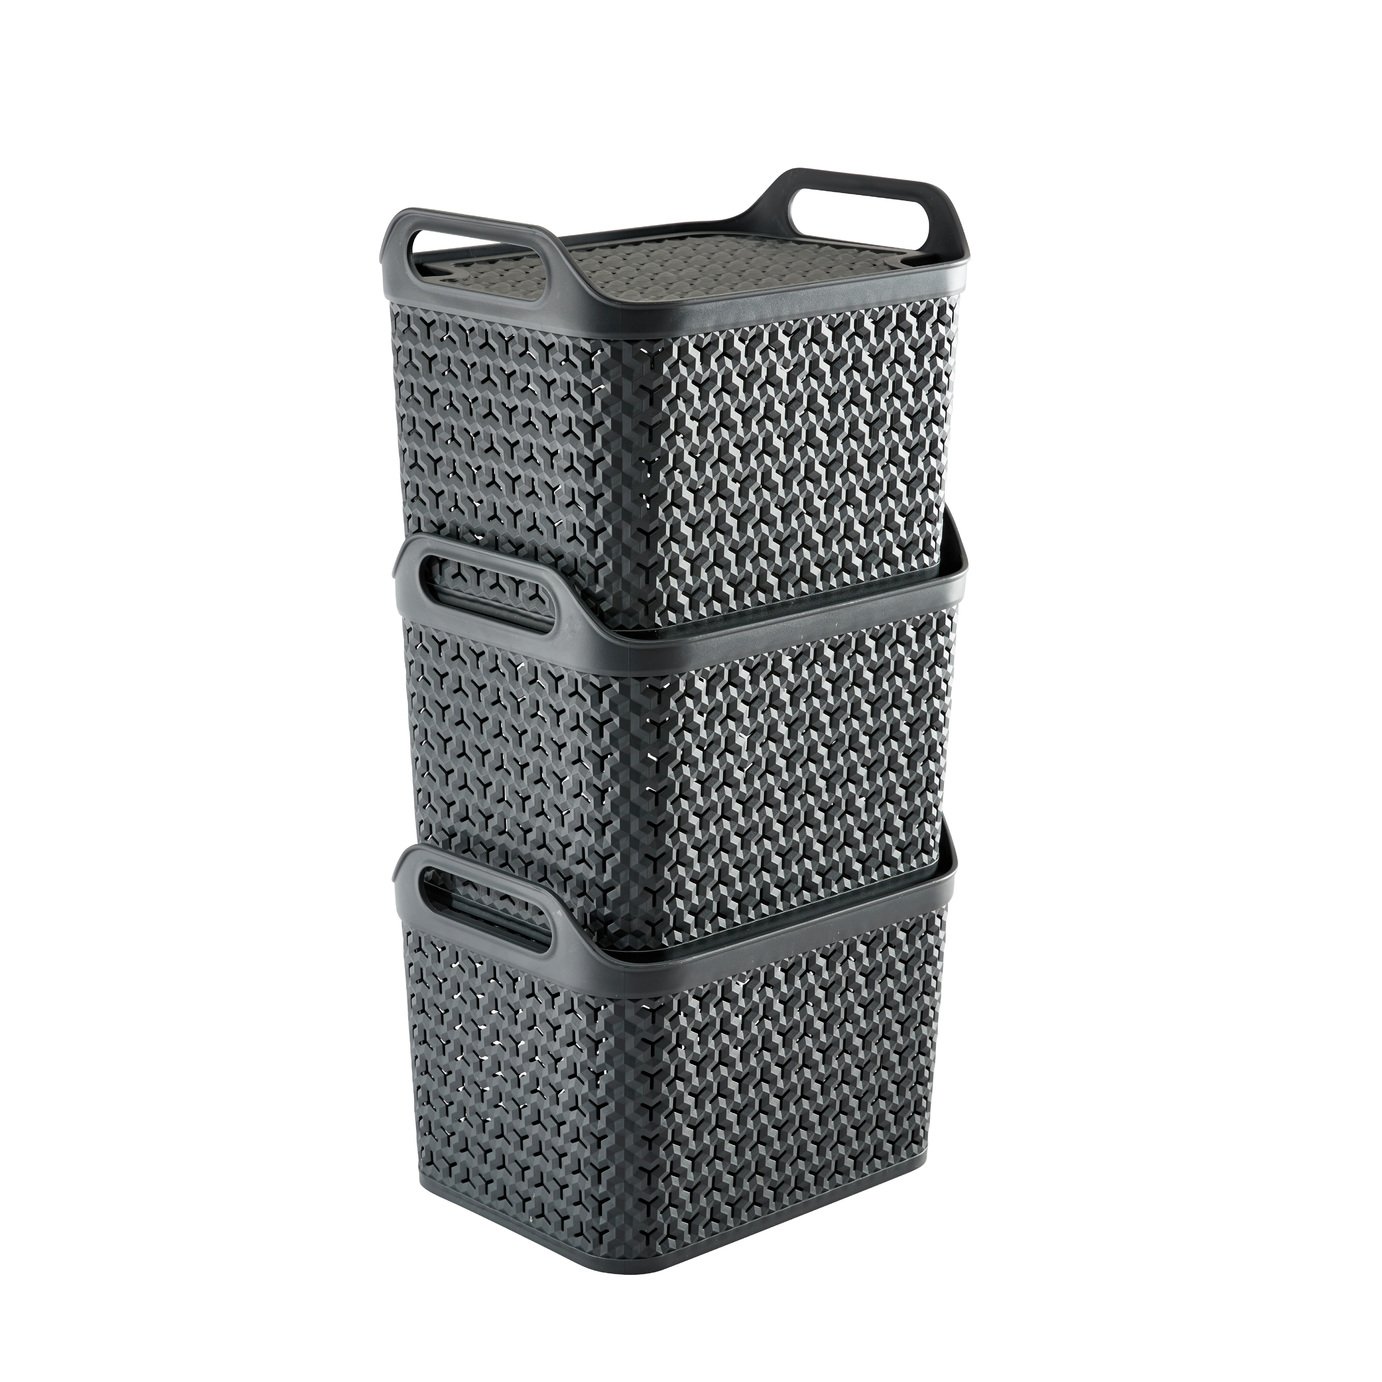 Strata 3 x 14L Urban Store Baskets with Lid - Charcoal